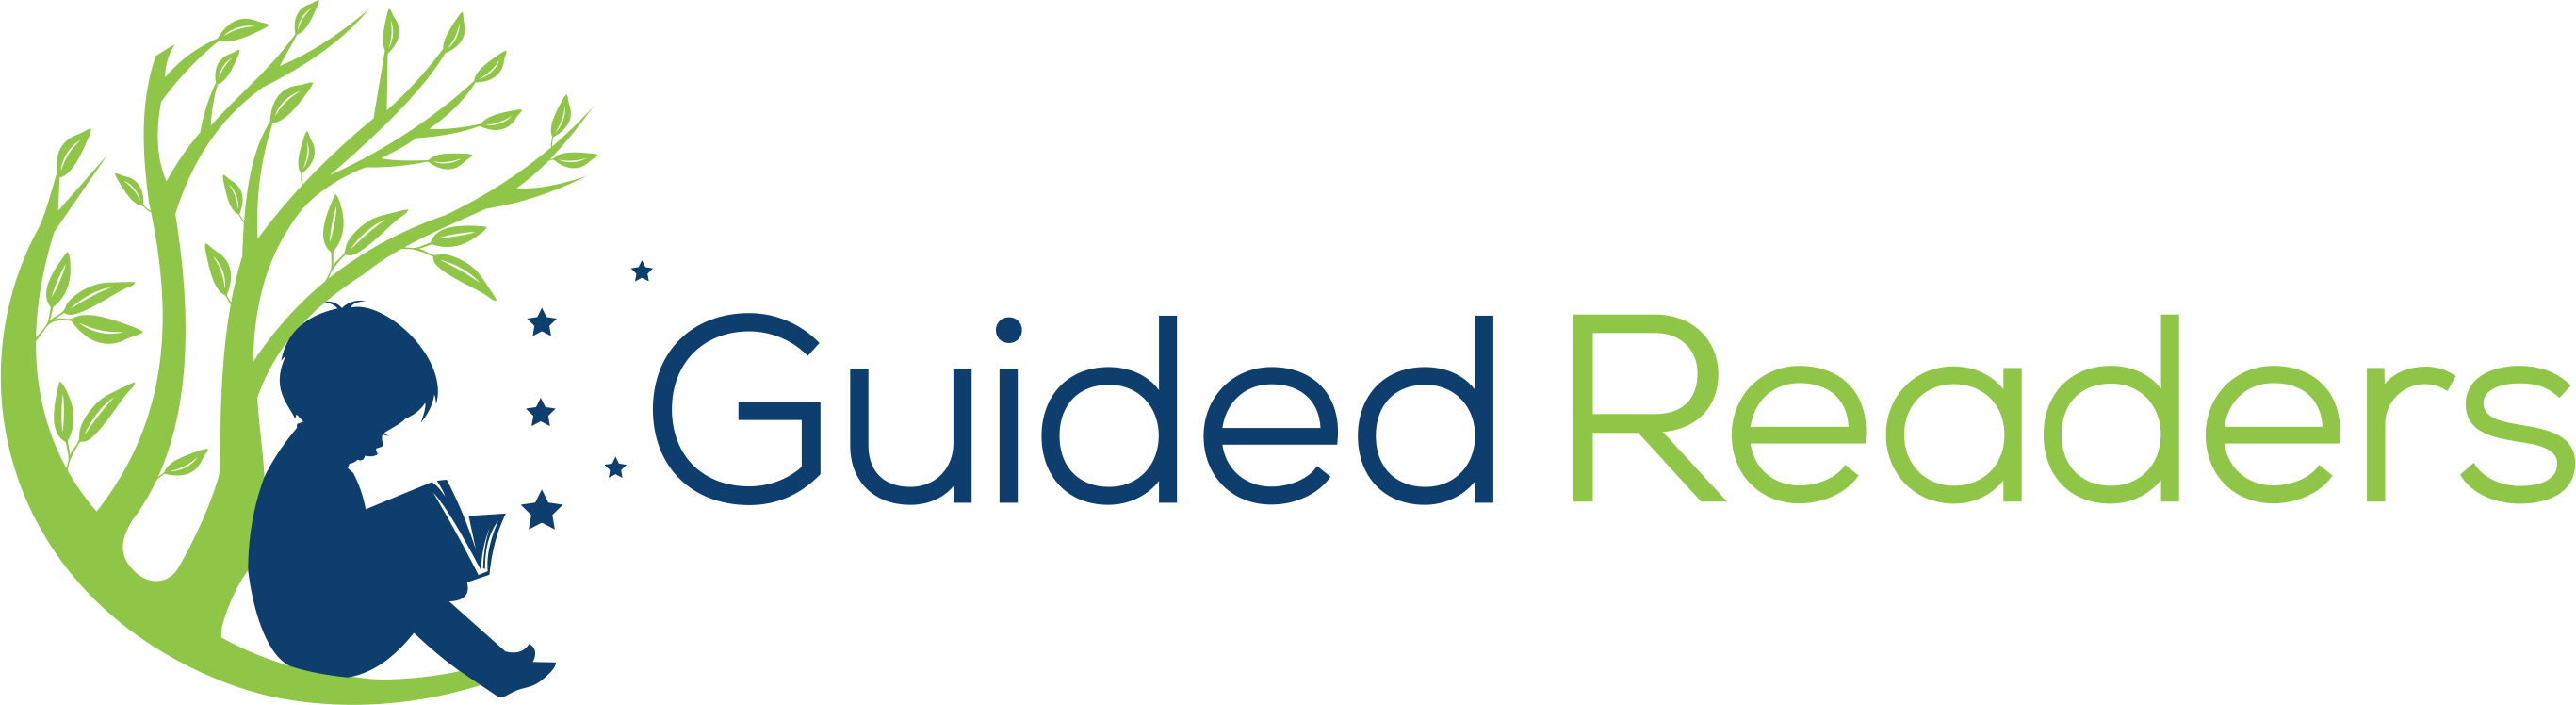 Guided Readers Logo